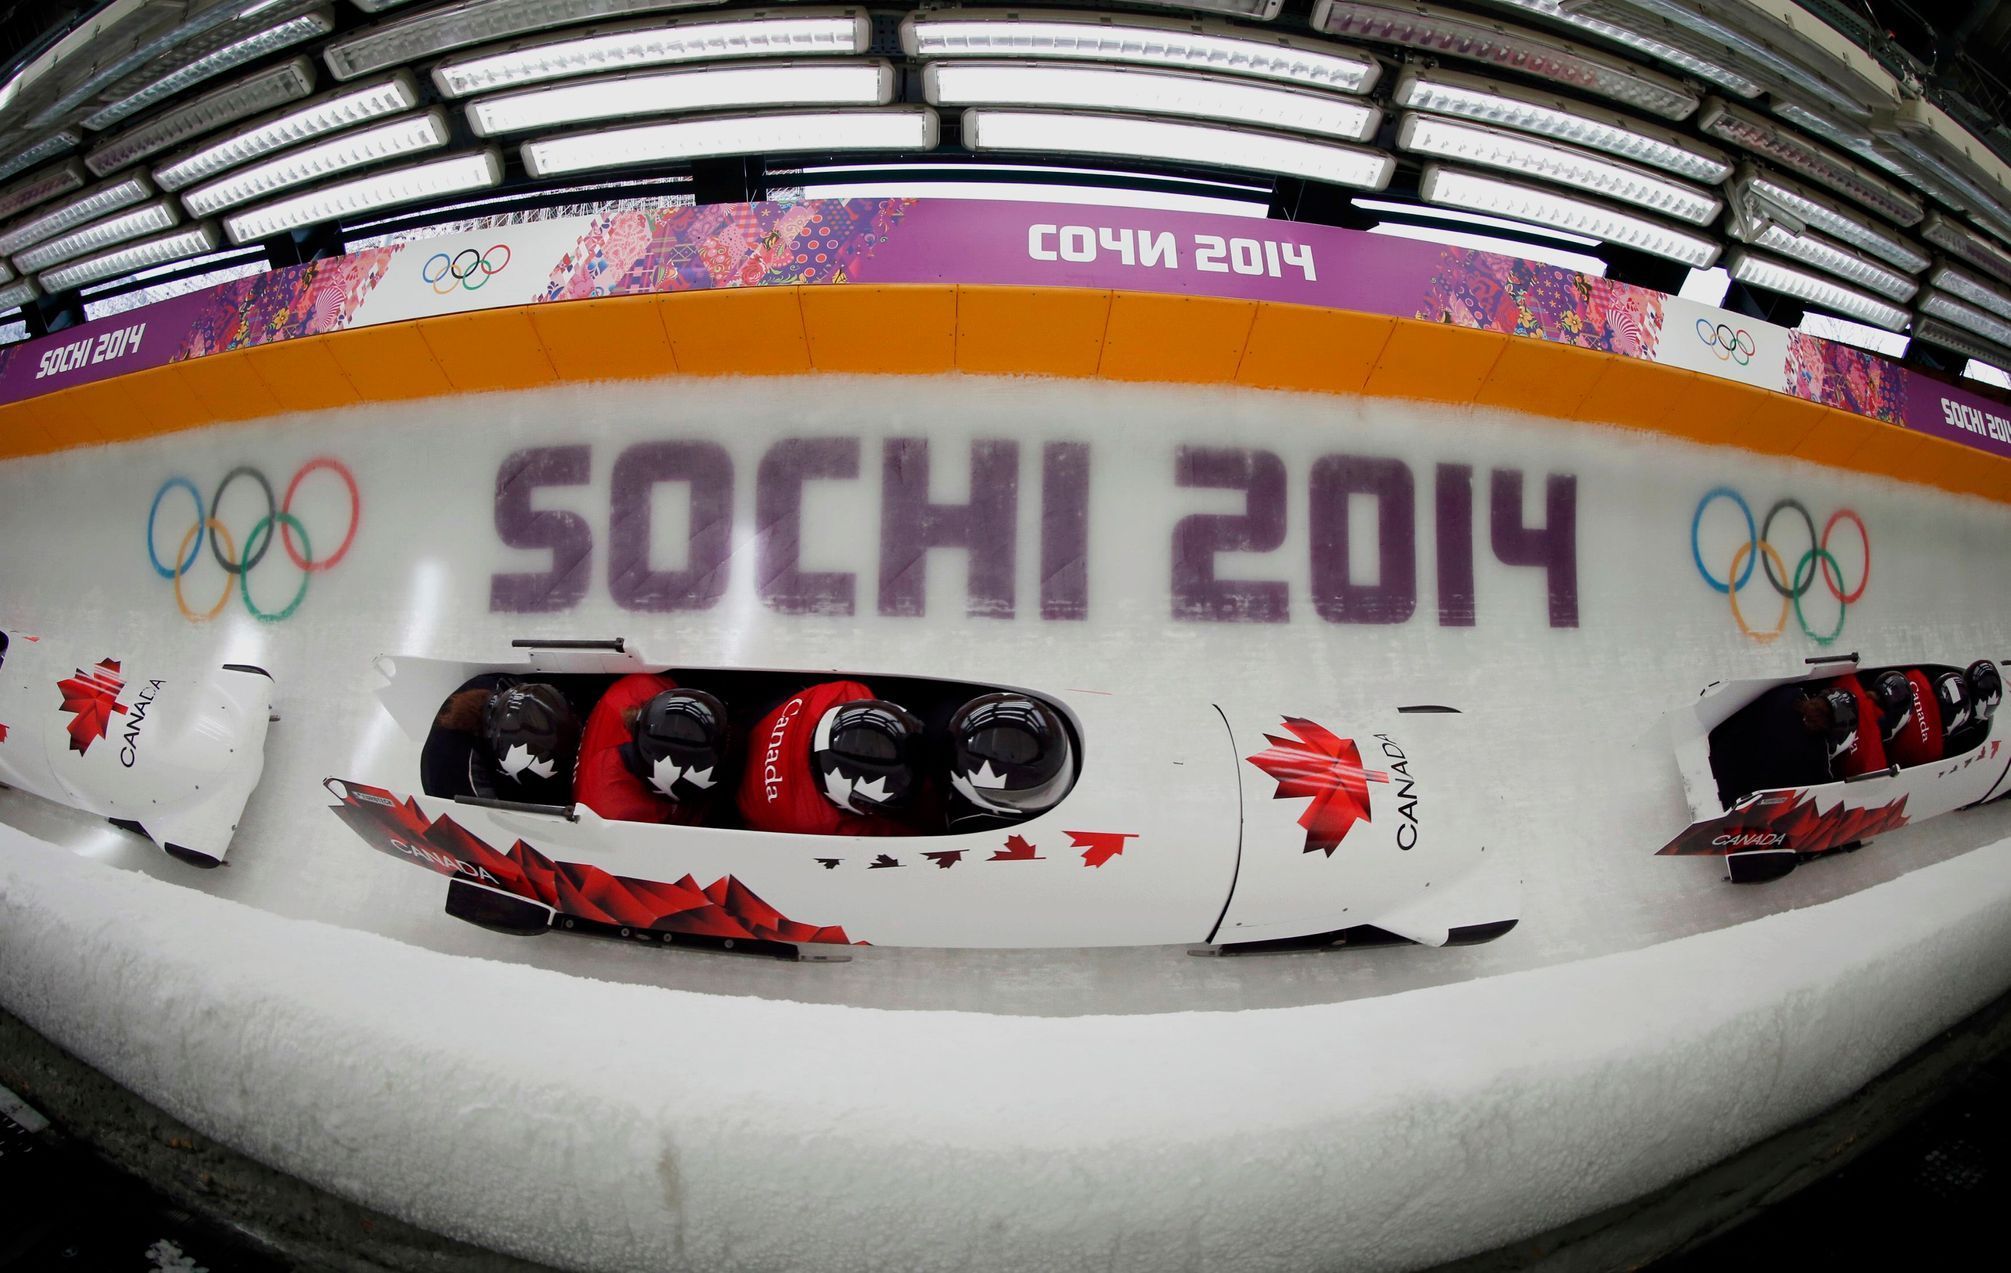 Canada's pilot Spring and his teammates speed down the track during a four-man bobsleigh training session in Rosa Khutor, during the Sochi 2014 Winter Olympics